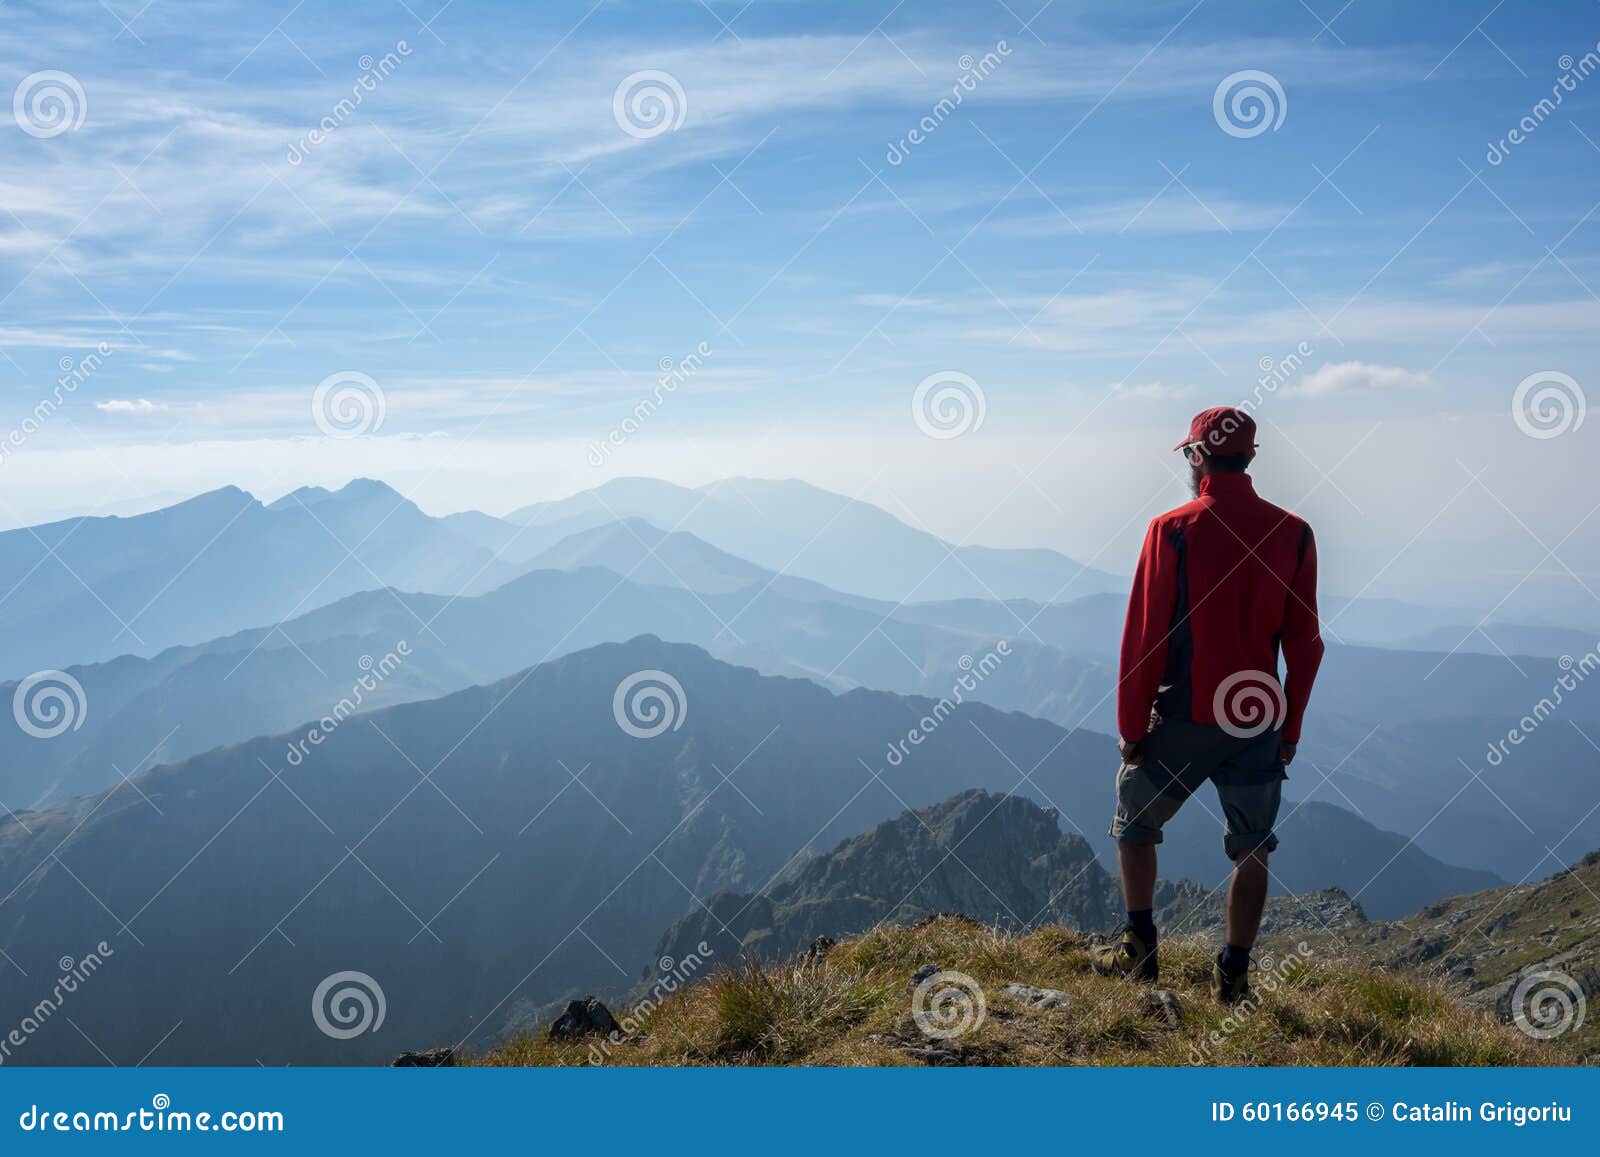 hiker looking over the mountain ridges